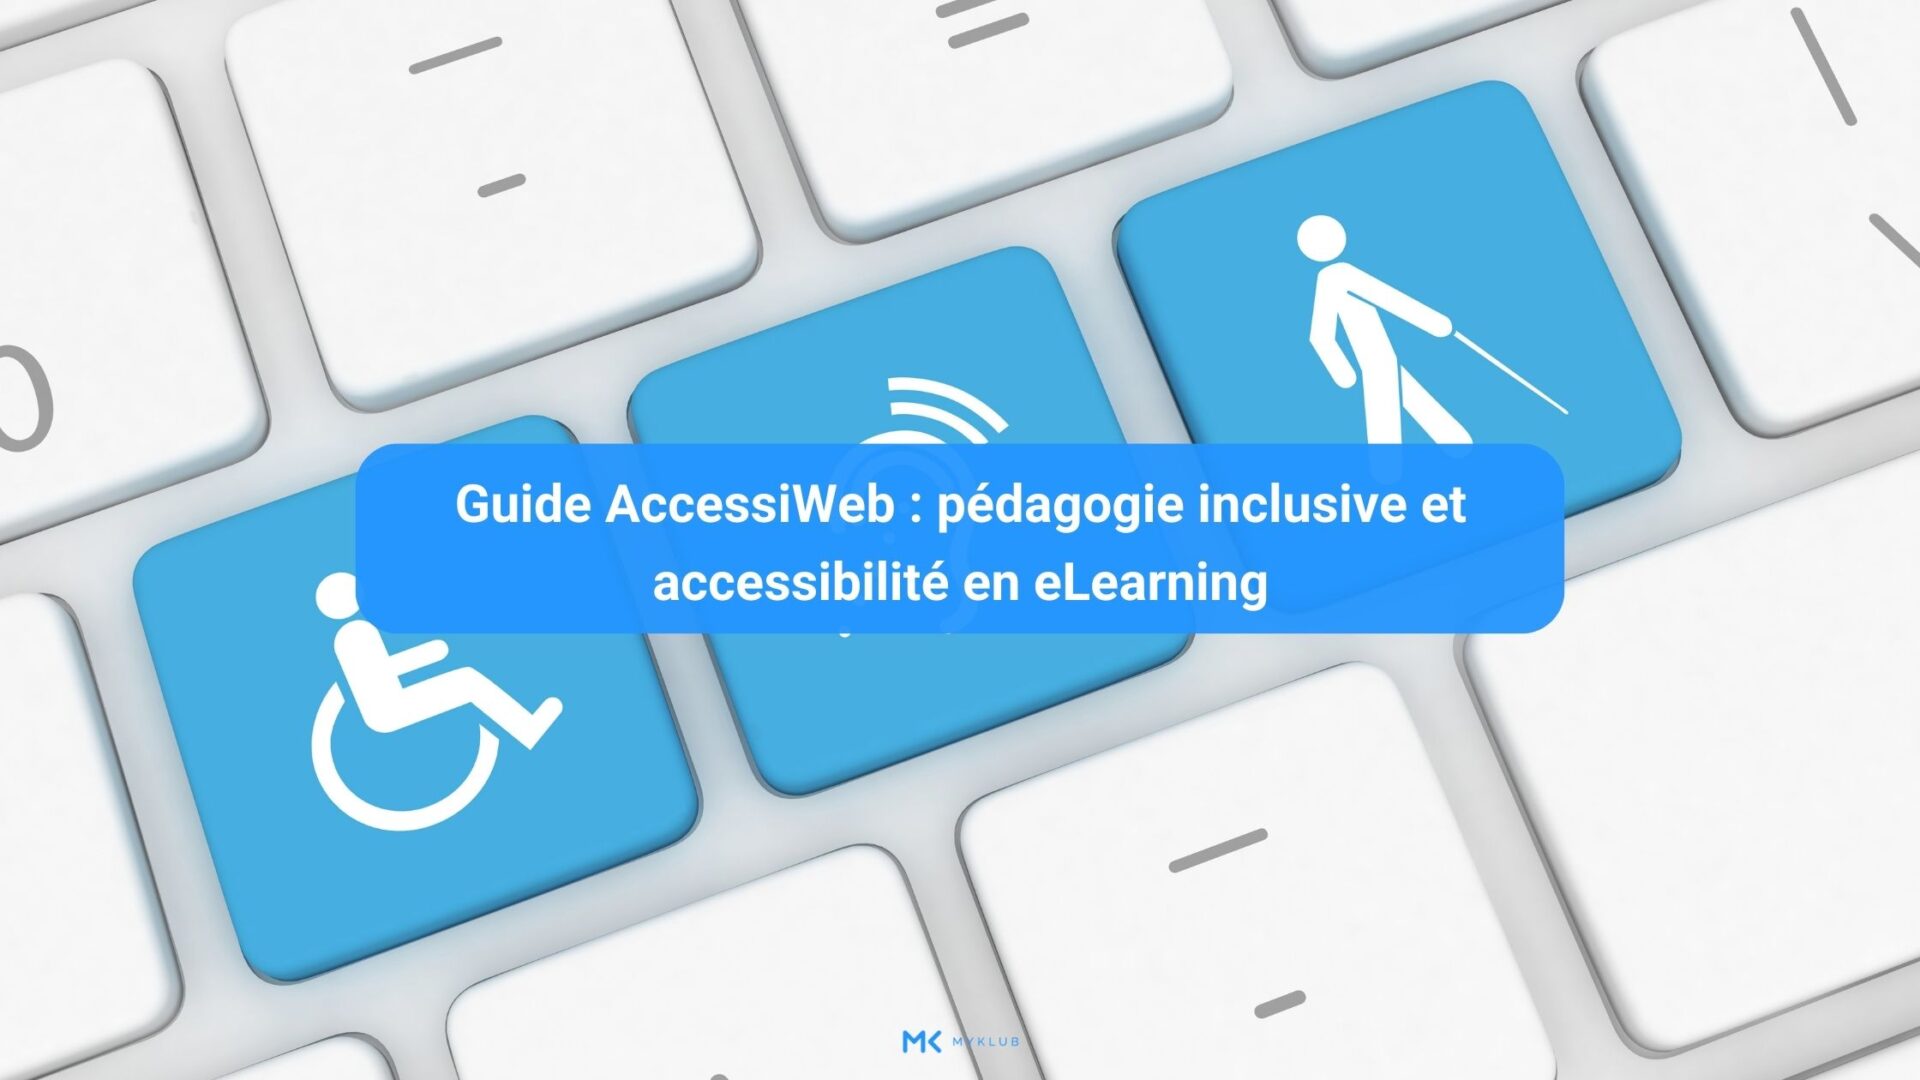 AccessiWeb Guide: inclusive pedagogy and accessibility in eLearning